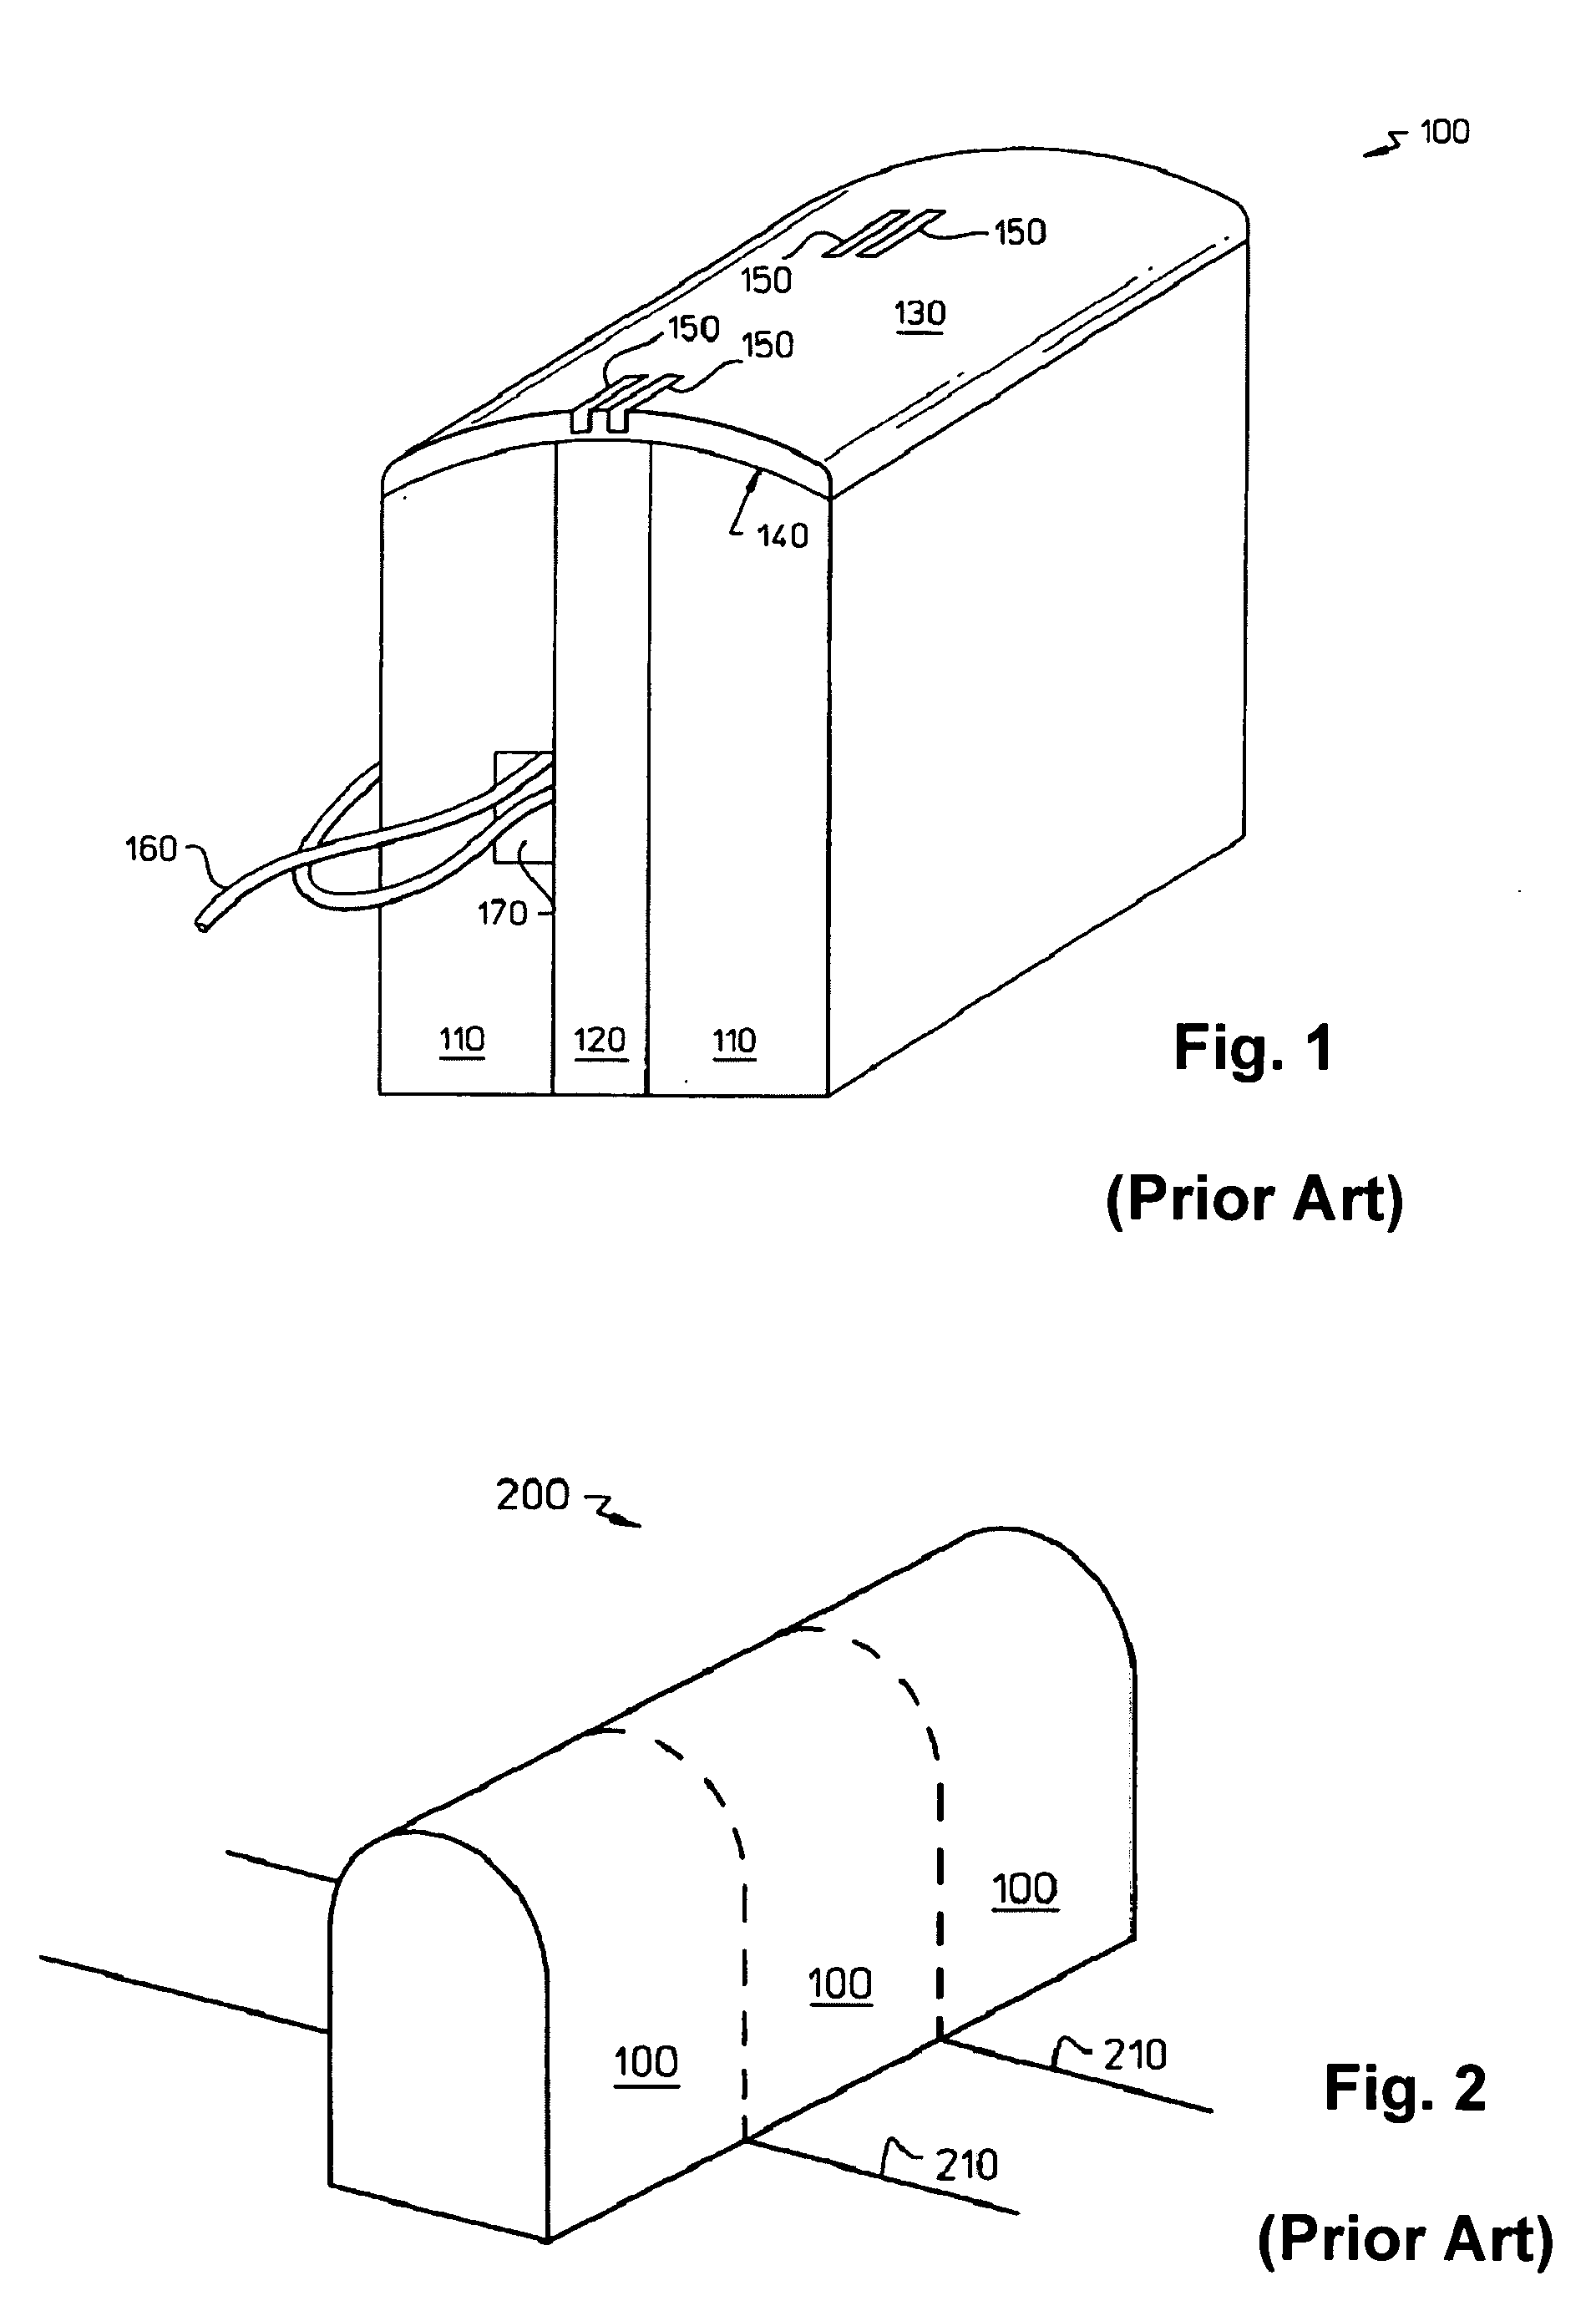 Embedded wire planar write head system and method